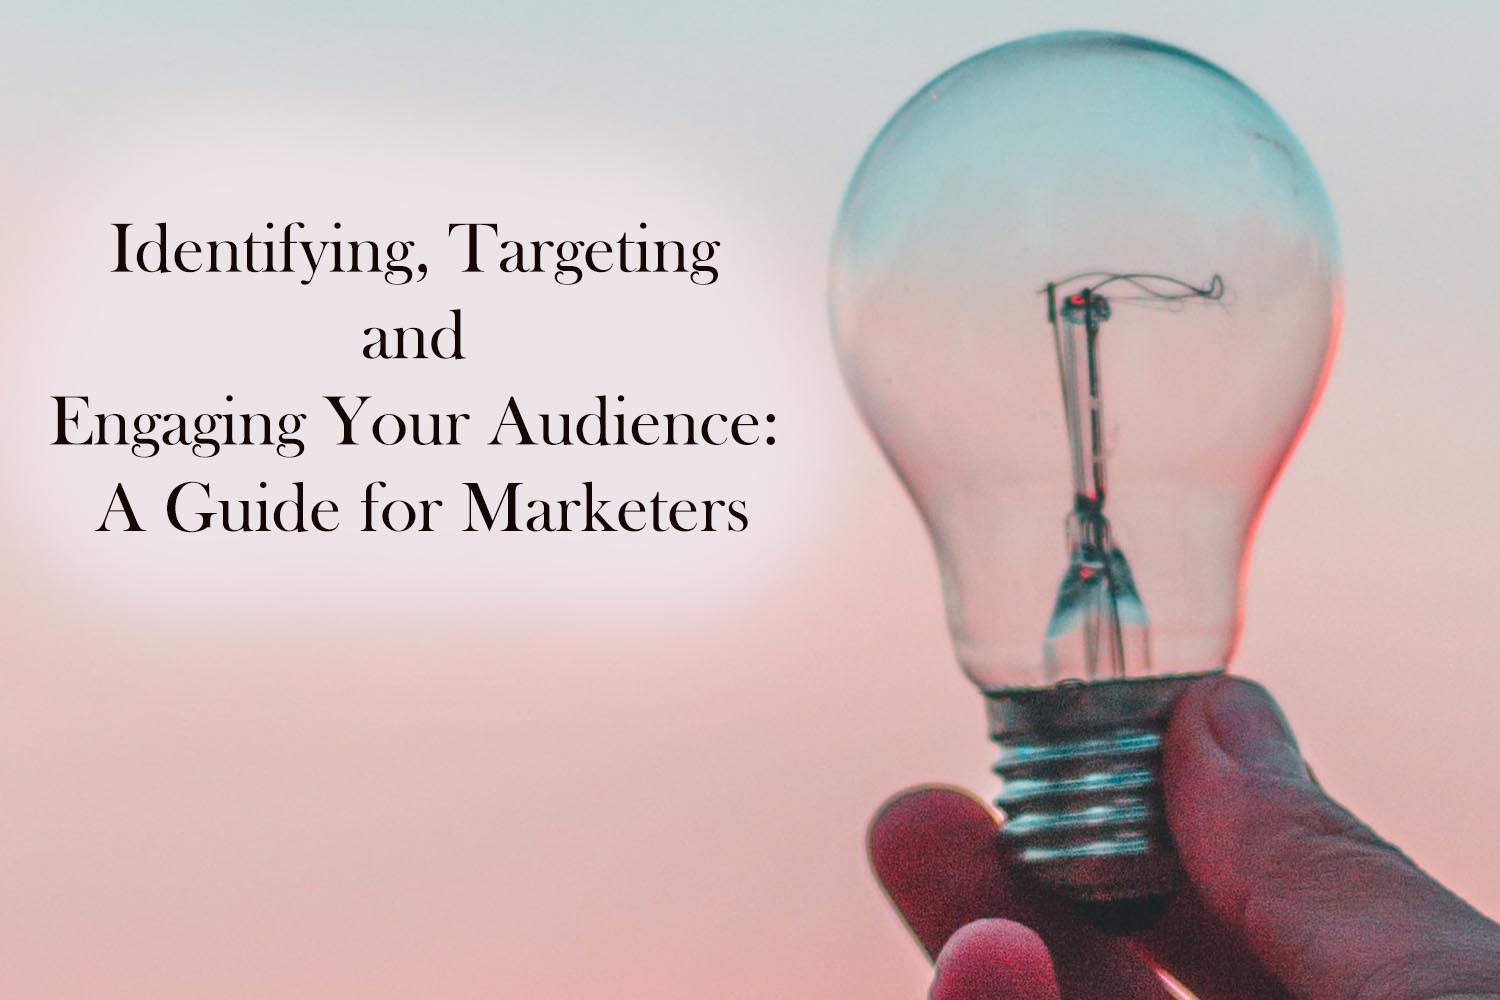 Identifying, Targeting and Engaging Your Audience